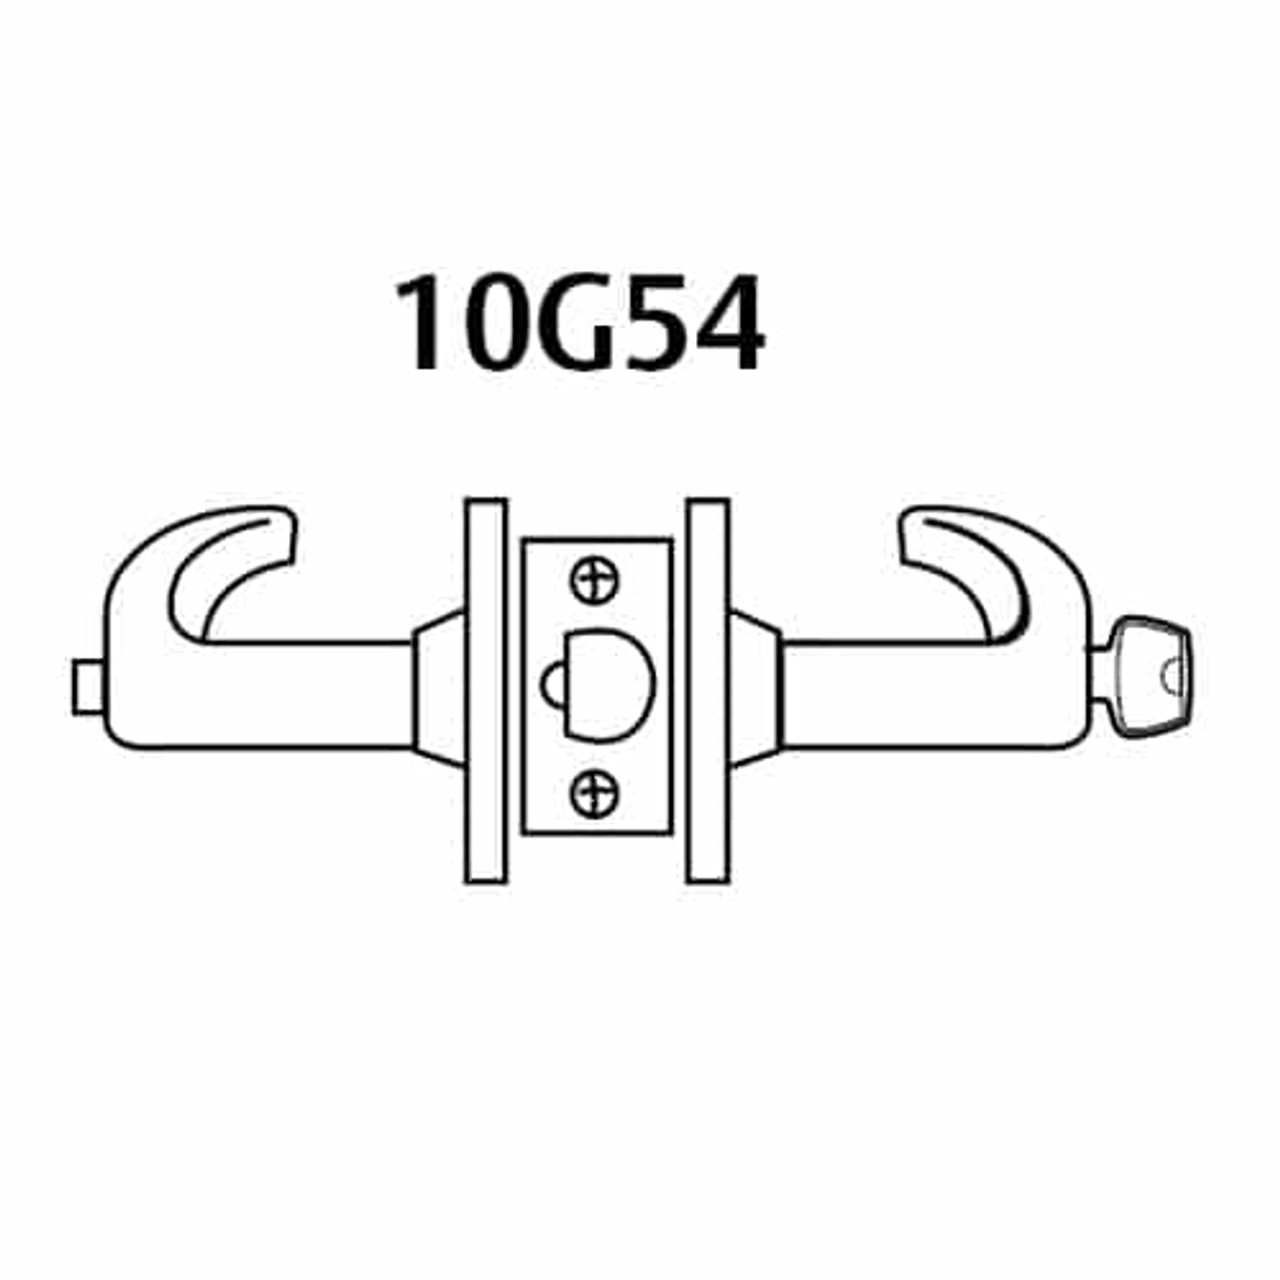 2860-10G54-GB-26 Sargent 10 Line Cylindrical Dormitory Locks with B Lever Design and G Rose Prepped for LFIC in Bright Chrome